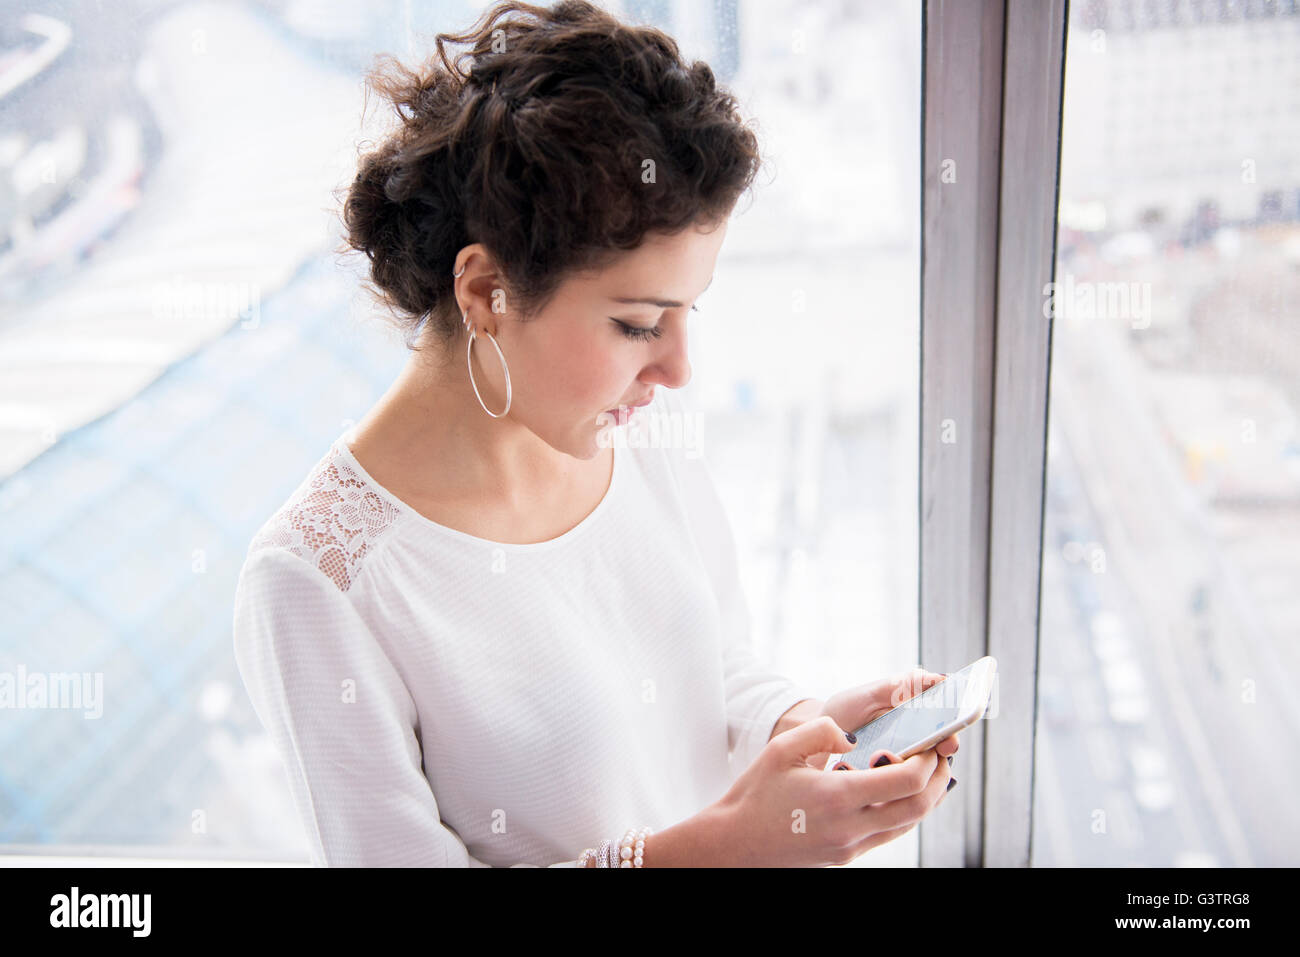 A professional woman looking at her phone in a high rise office block. Stock Photo